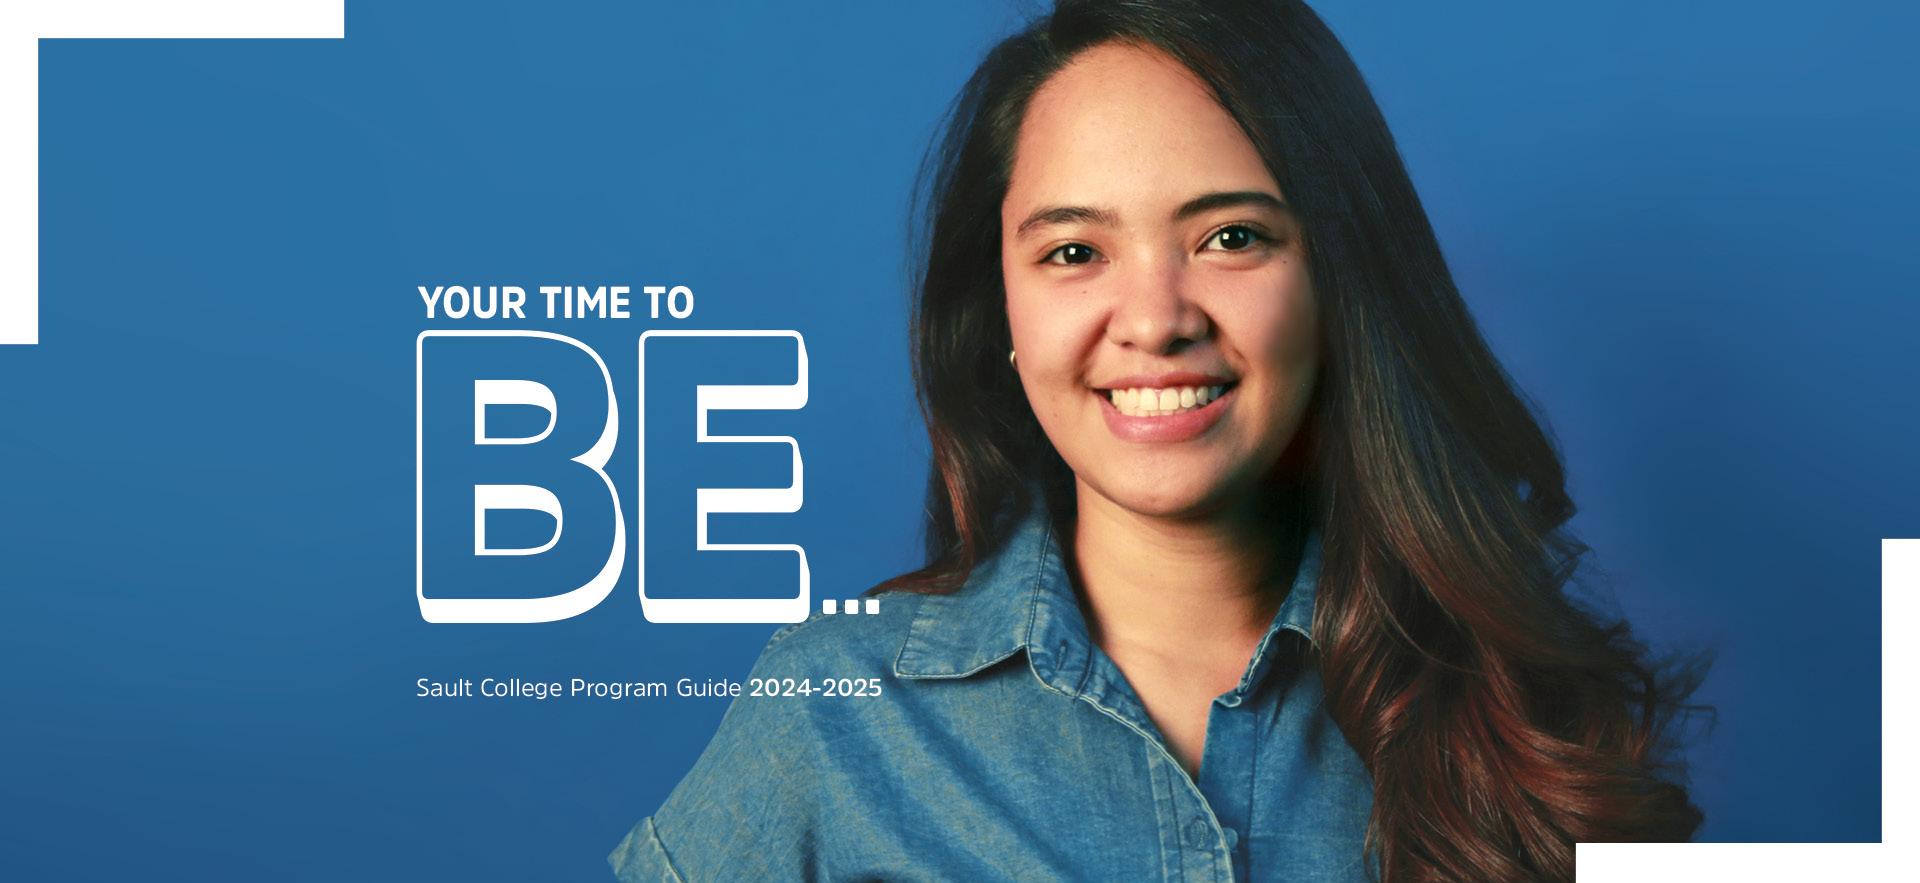 Female student in blue shirt smiling with blue background and text overlay "your time to BE..." for о Program Guide for 2024-25